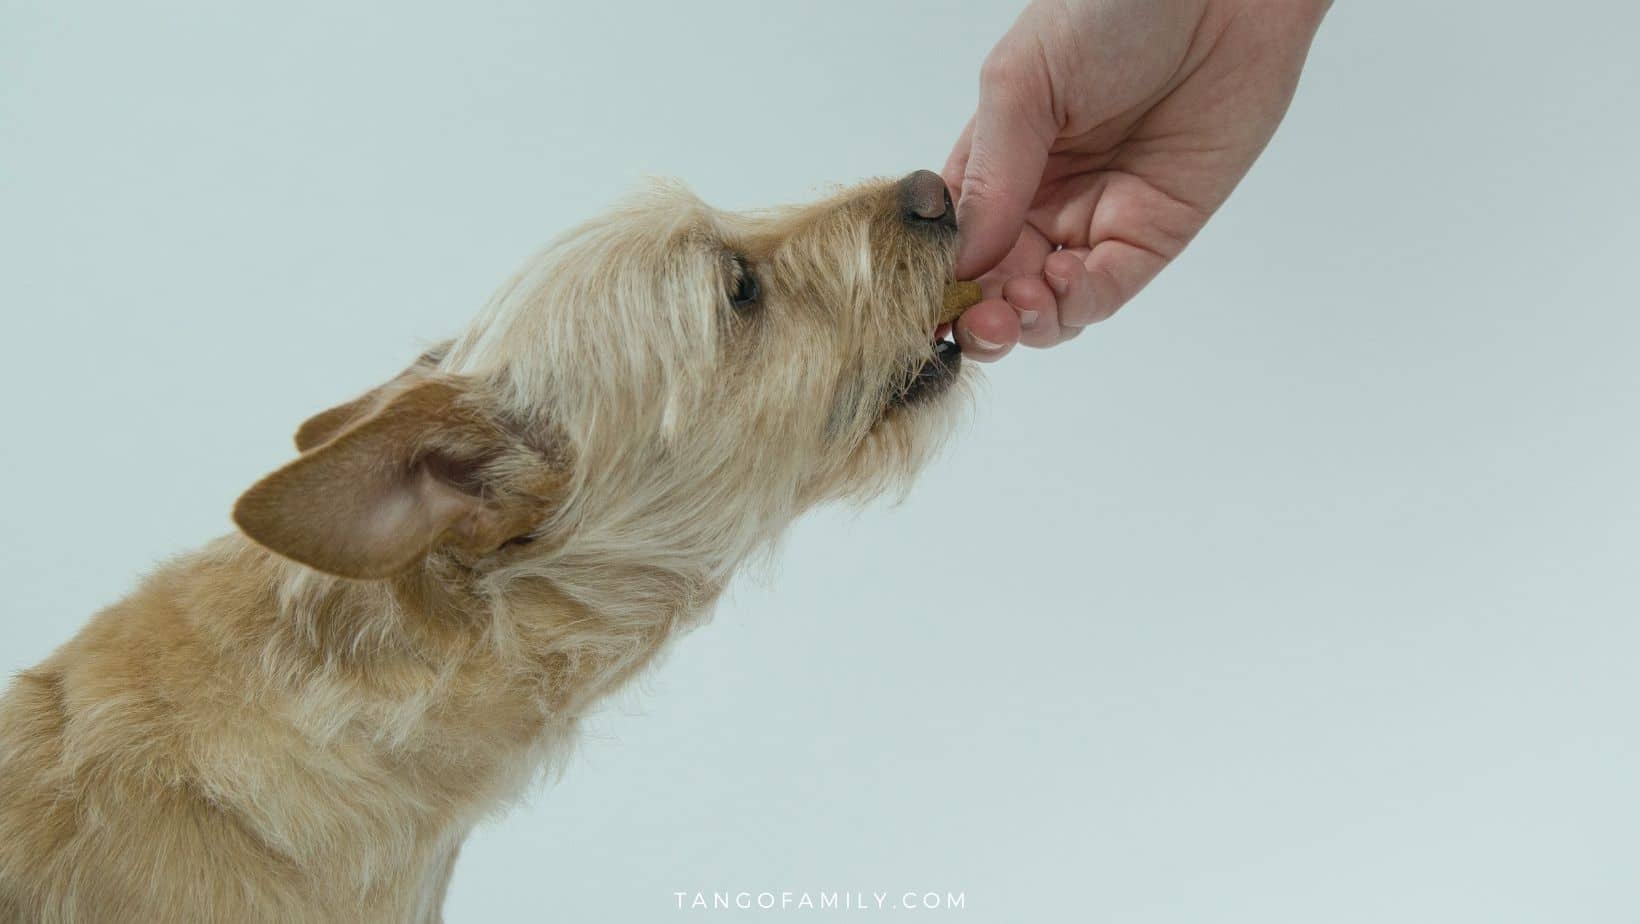 Can Dogs Eat Jelly Beans? Are Jelly Beans Harmful or Safe?